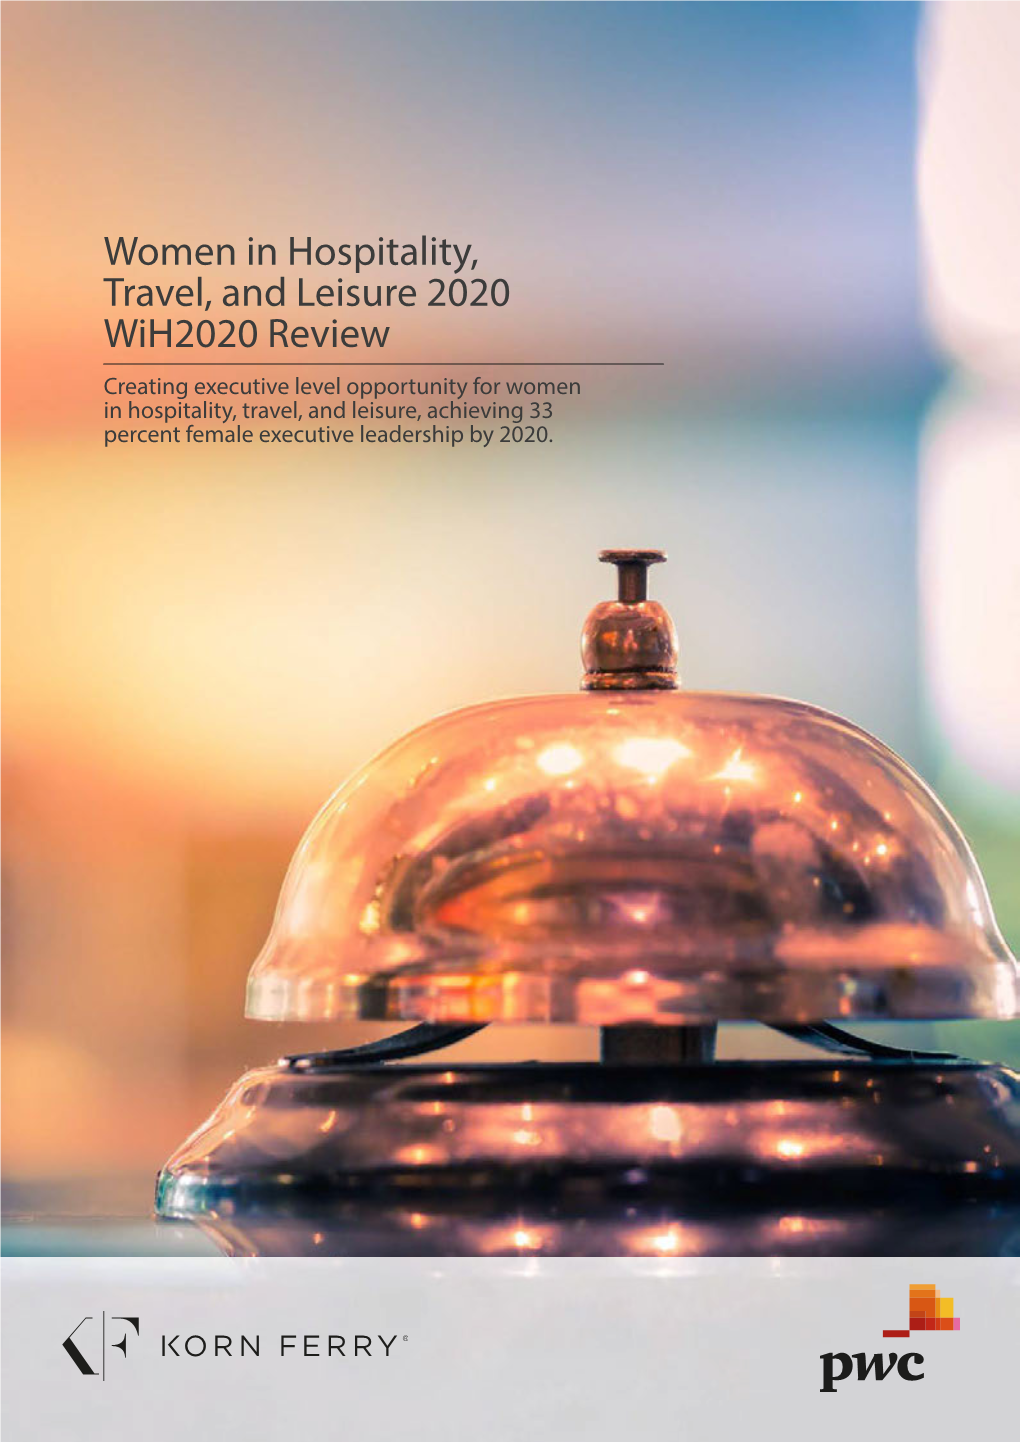 Women in Hospitality, Travel, and Leisure 2020 Wih2020 Review